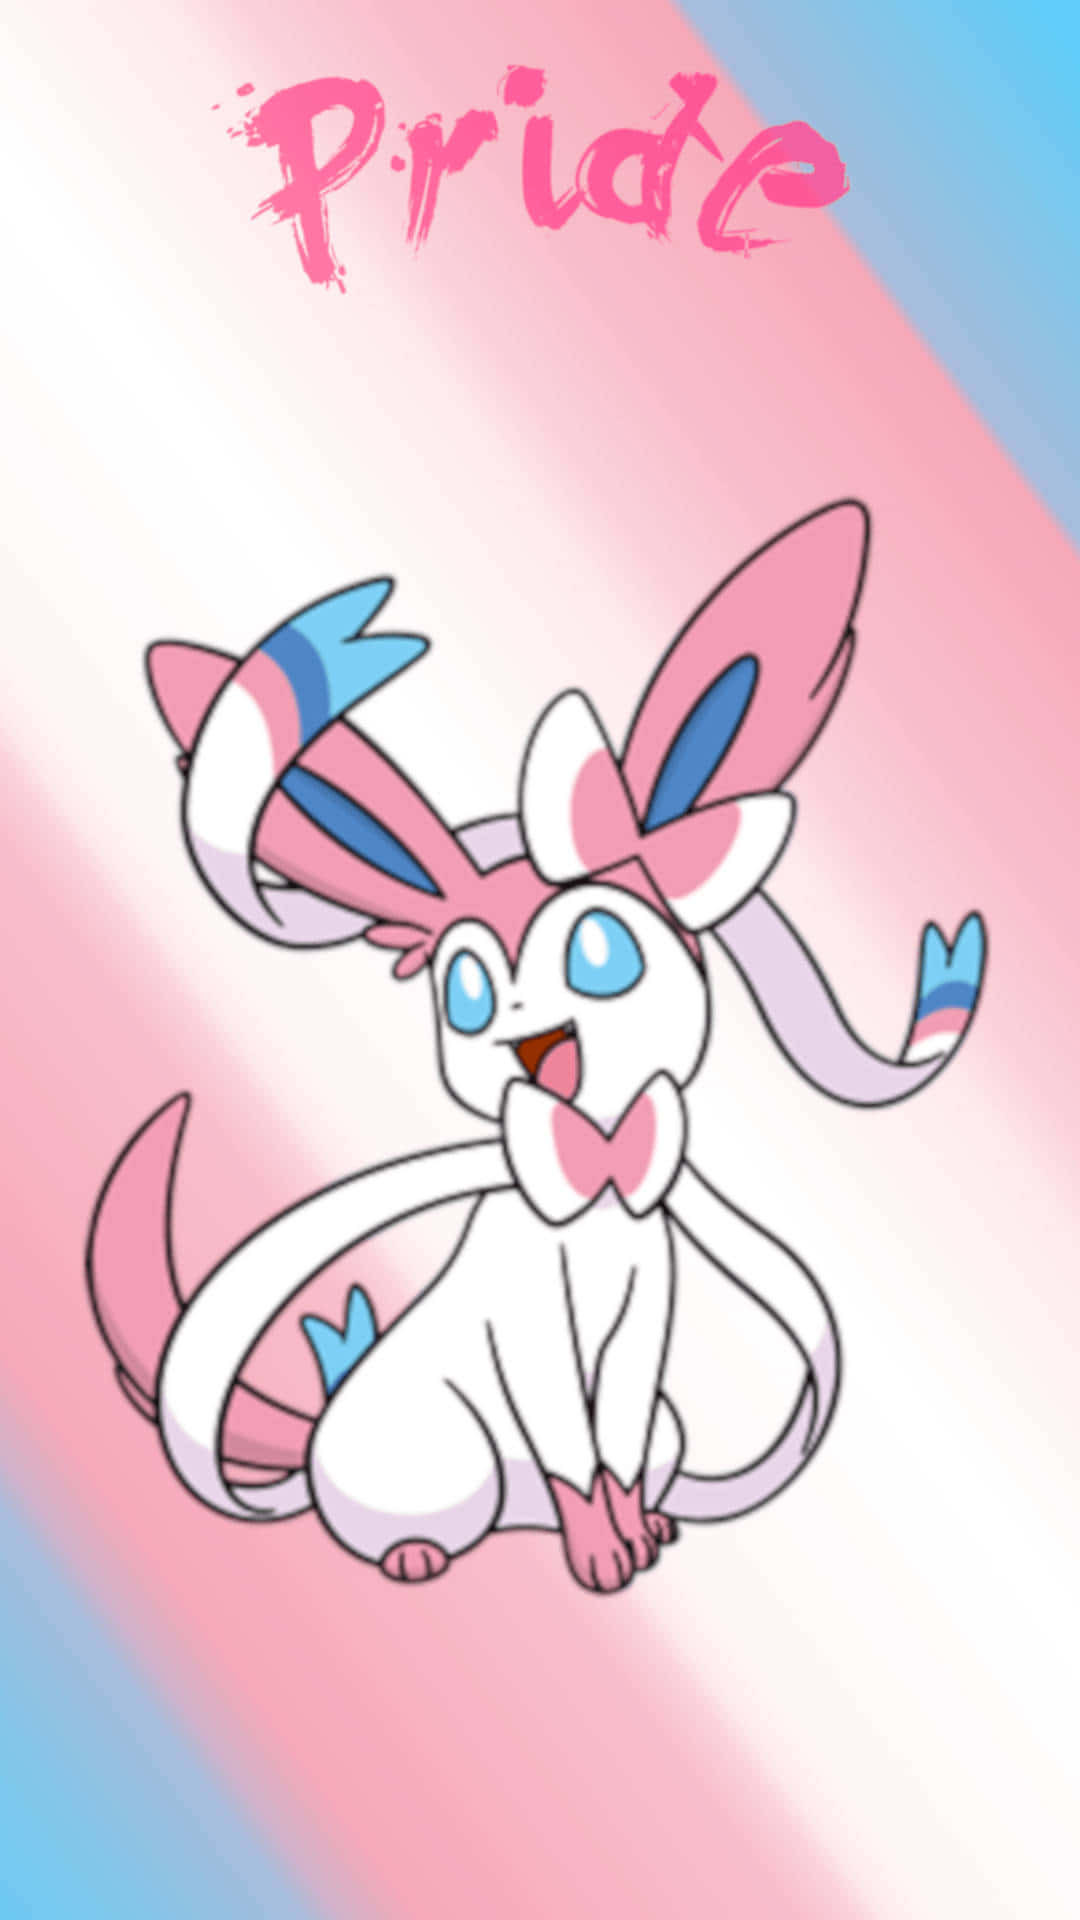 Cute Sylveon, the perfect pet for any magical creature. Wallpaper